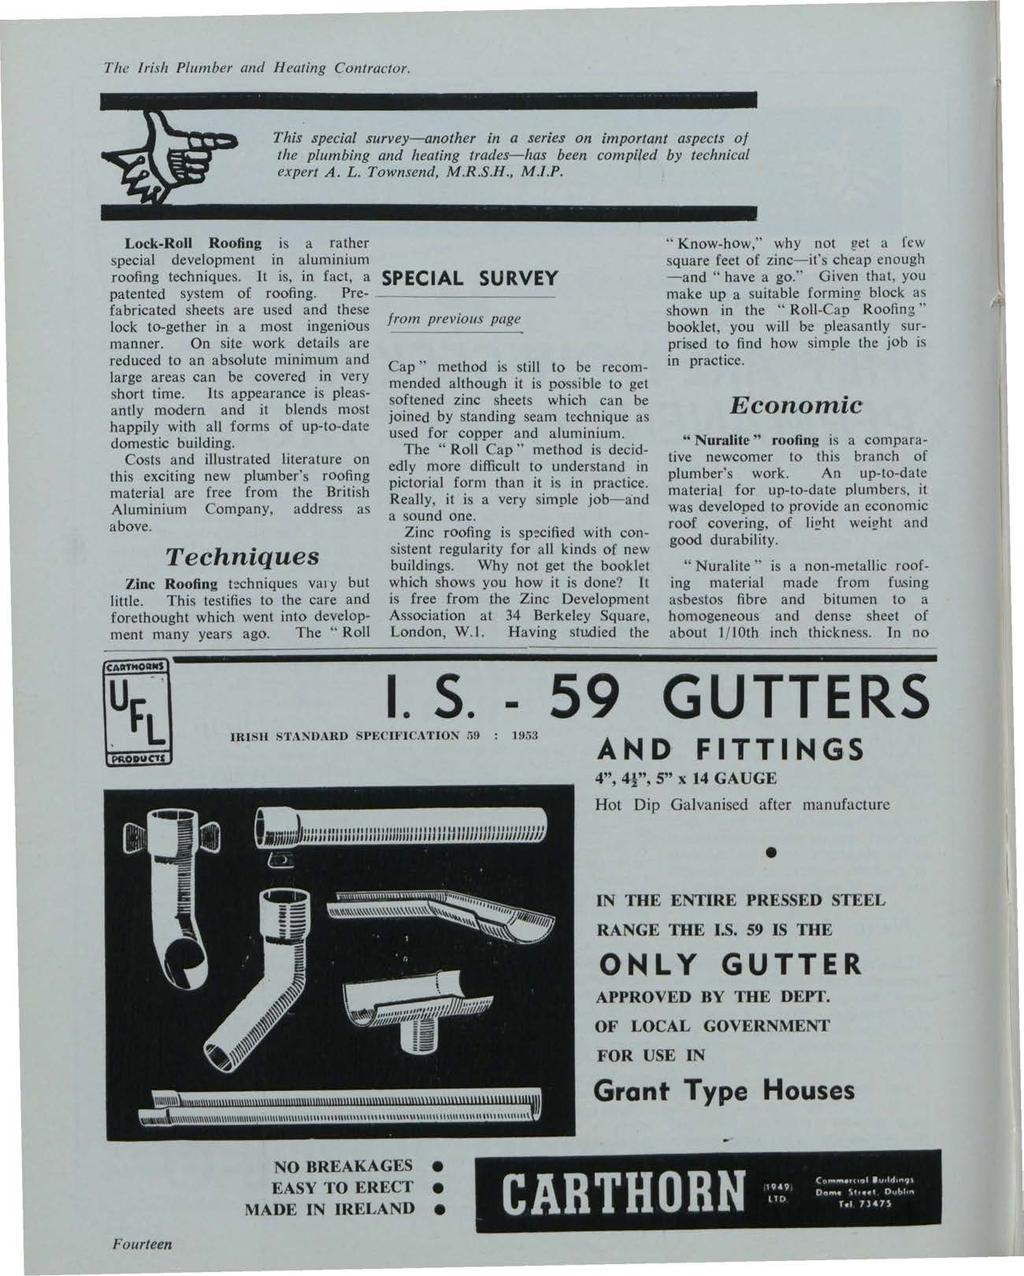 Building Services News, Vol. 2, Iss. 12 [1963], Art. 1 The Irish Plumber and Heating Contractor.